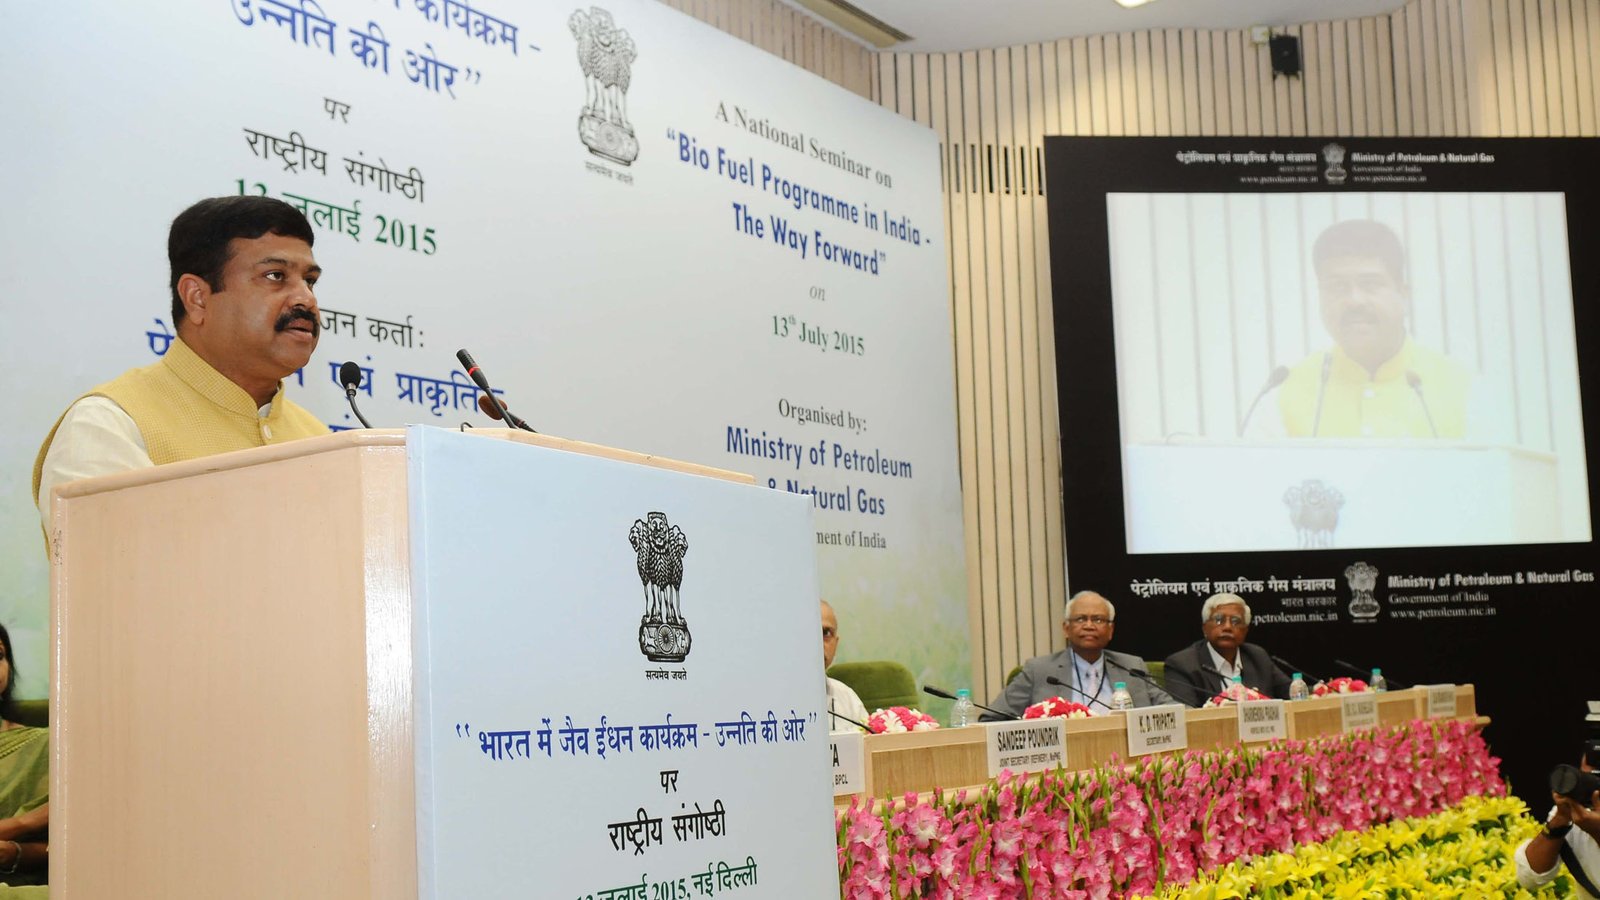 The Minister of State for Petroleum and Natural Gas (Independent Charge), Mr Dharmendra Pradhan delivering the inaugural address at the National Seminar on â€œBio Fuel Programme in India-The Way Forwardâ€?, in New Delhi on July 13, 2015.